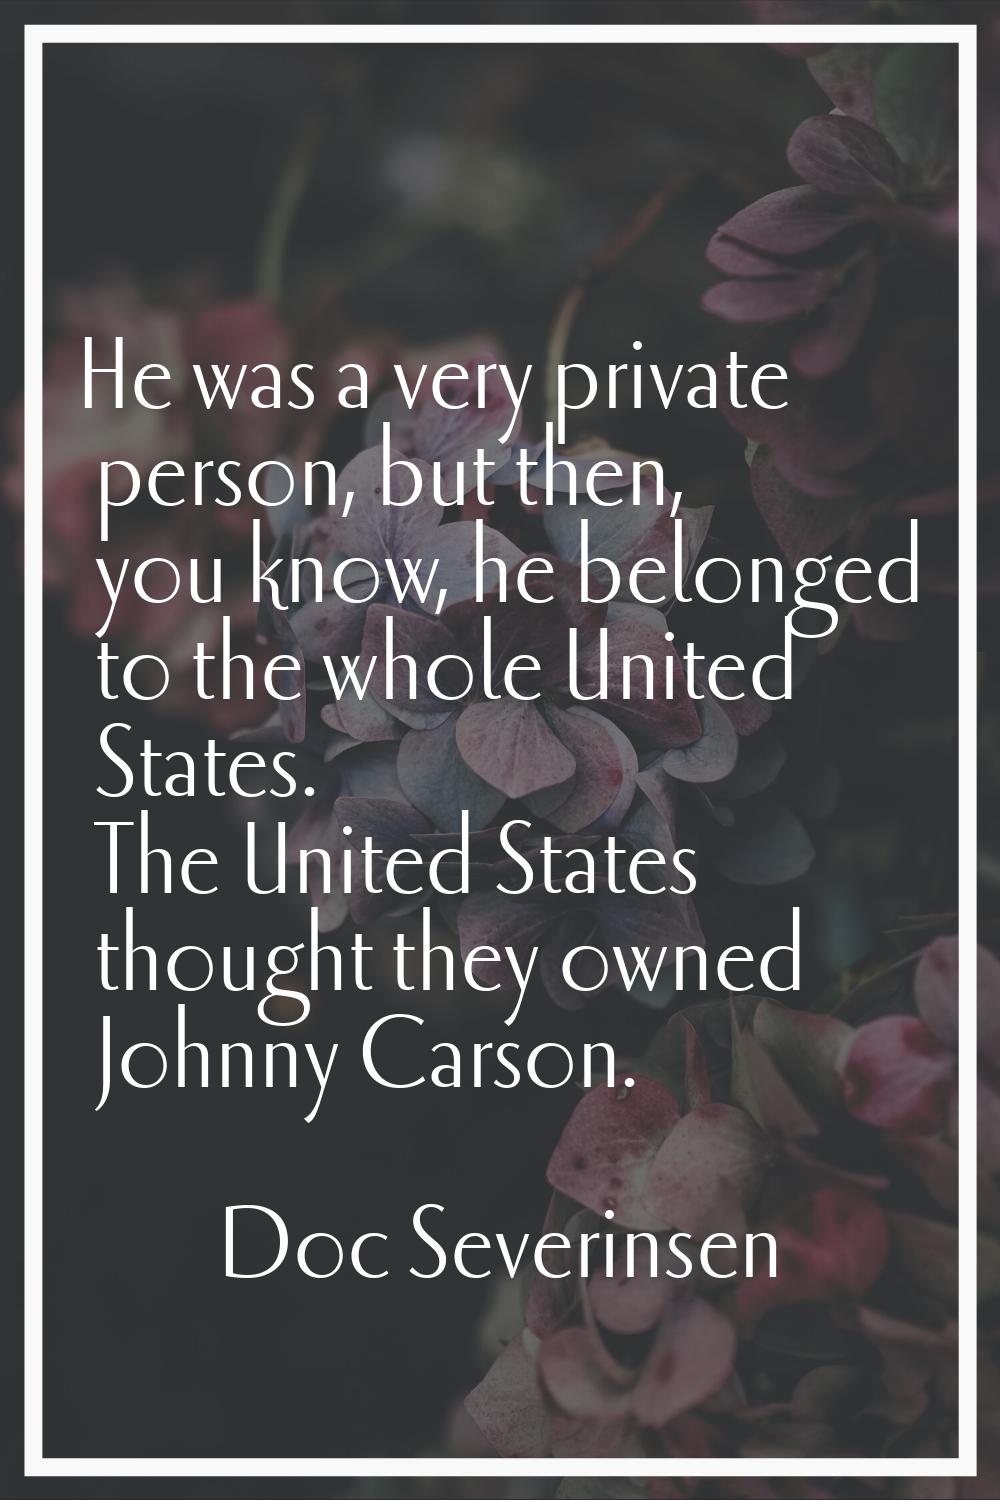 He was a very private person, but then, you know, he belonged to the whole United States. The Unite